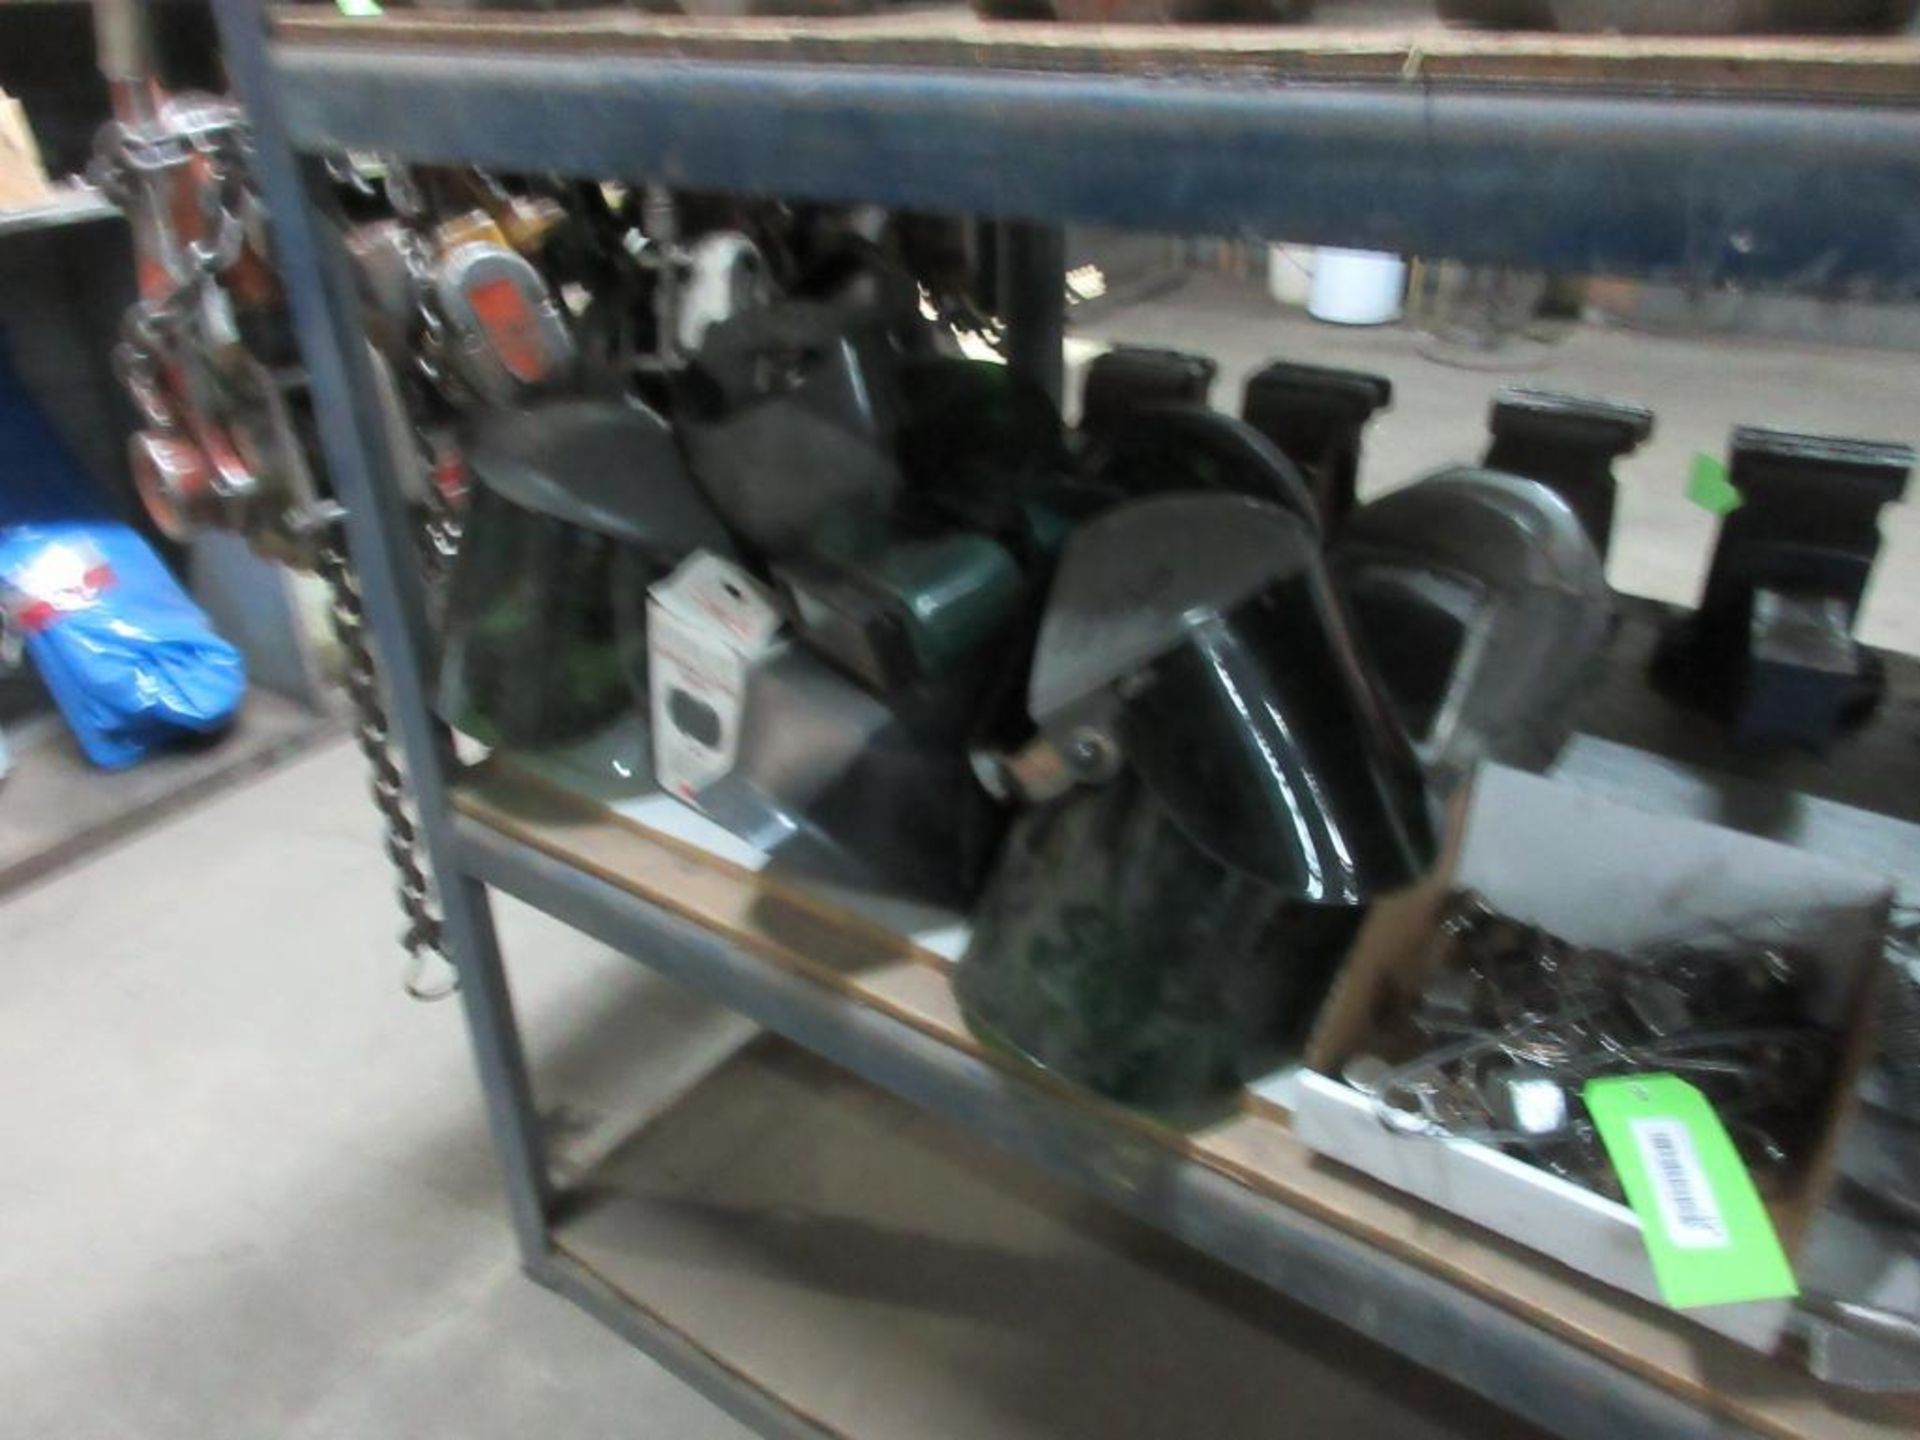 LOT OF WELDING MASKS, GOGGLES, CLAMPS, BRUSHES, IGNITORS, PICKS (CENTRAL TOOL CRIB) - Image 5 of 5